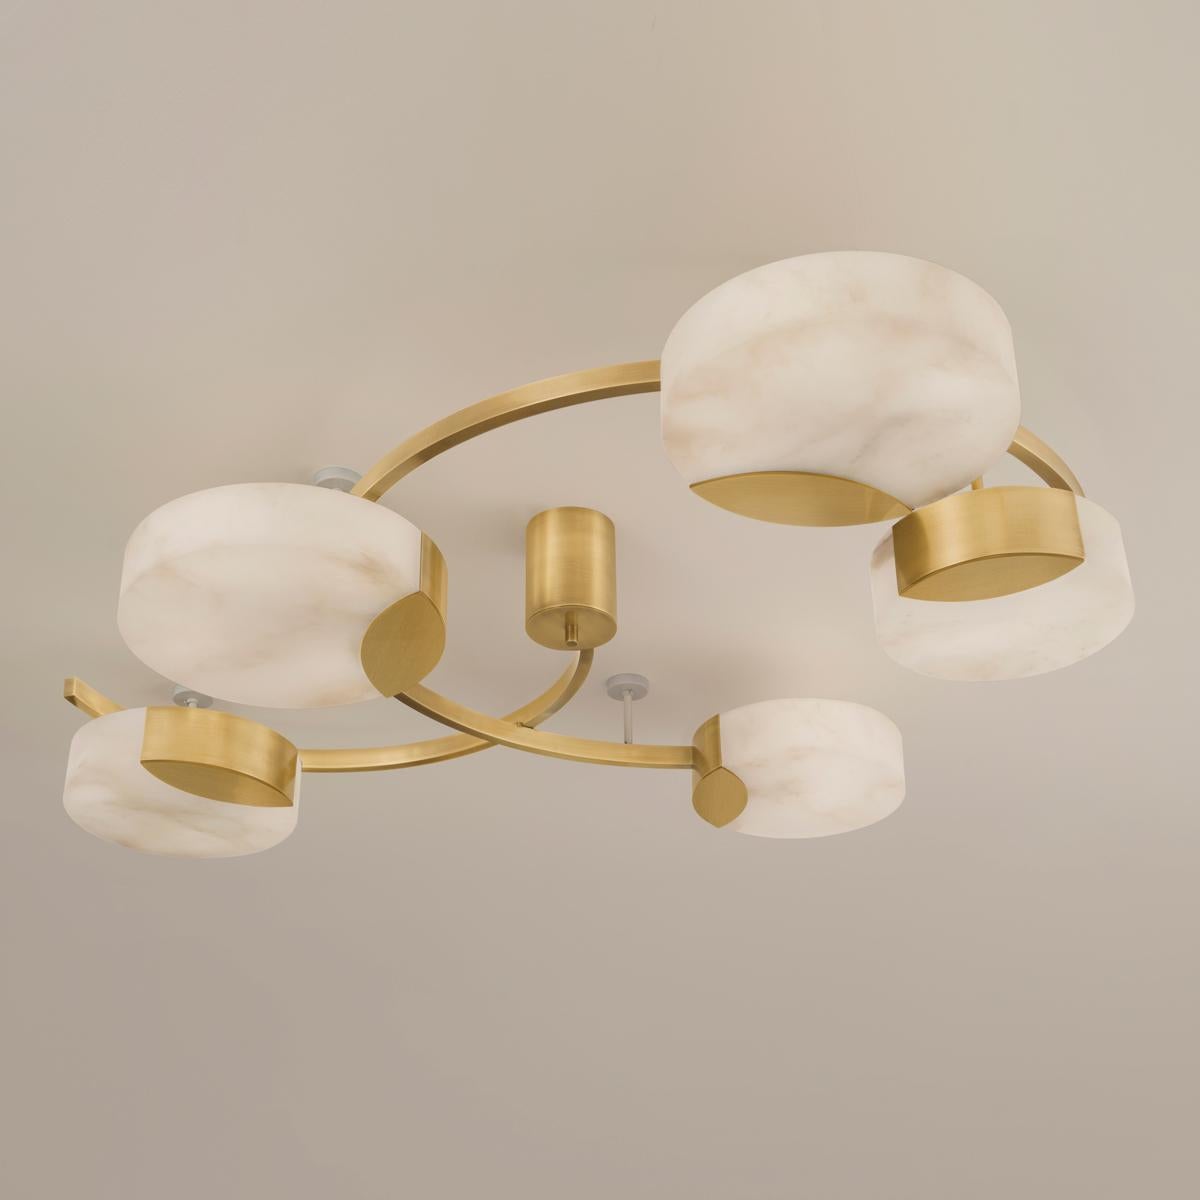 Italian Cloud N.5 Ceiling Light by Gaspare Asaro-Satin Brass Finish For Sale